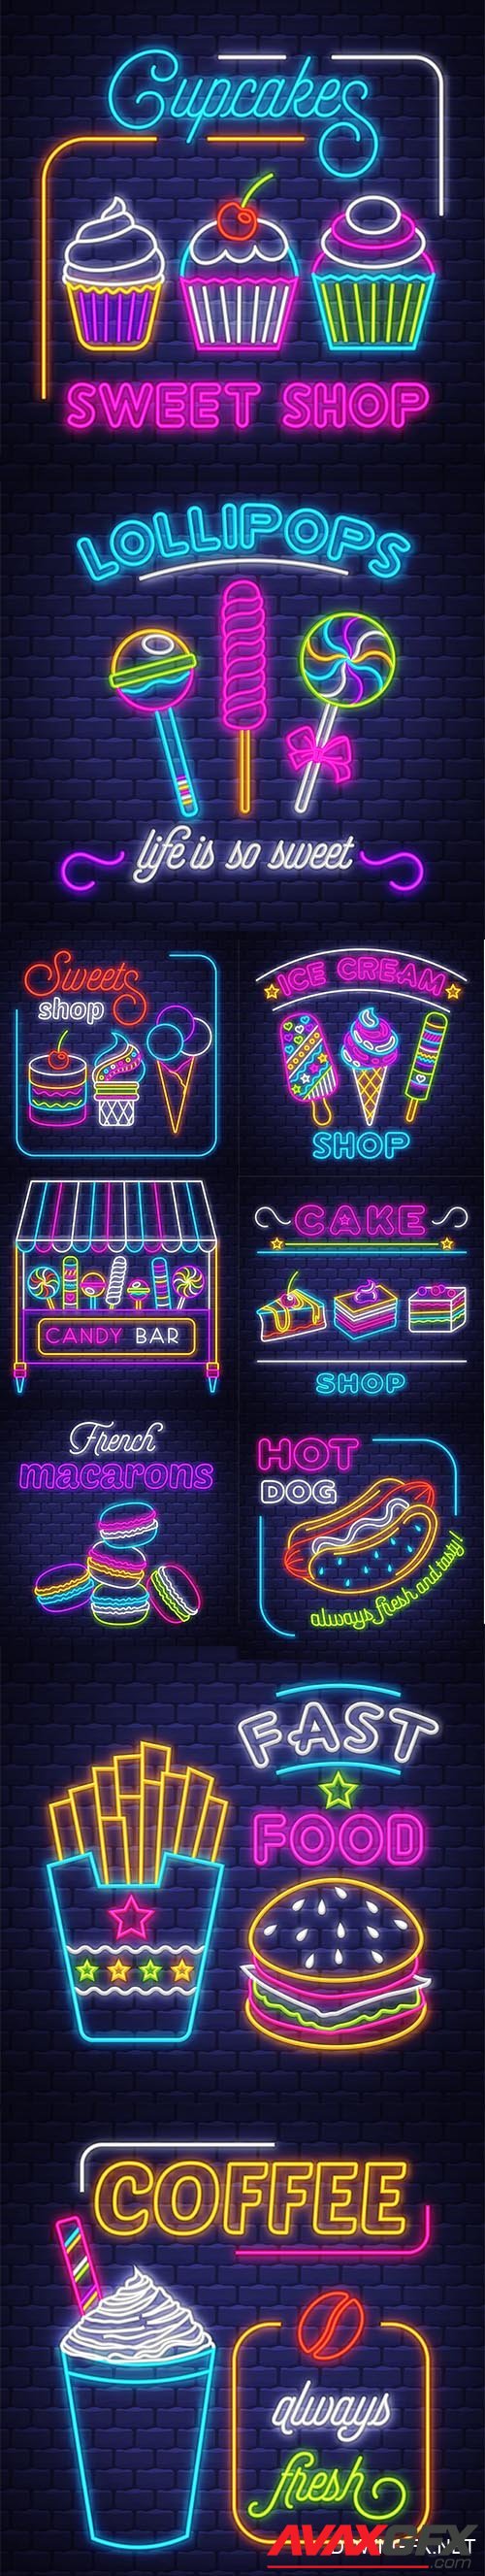 Sweets neon sign vector